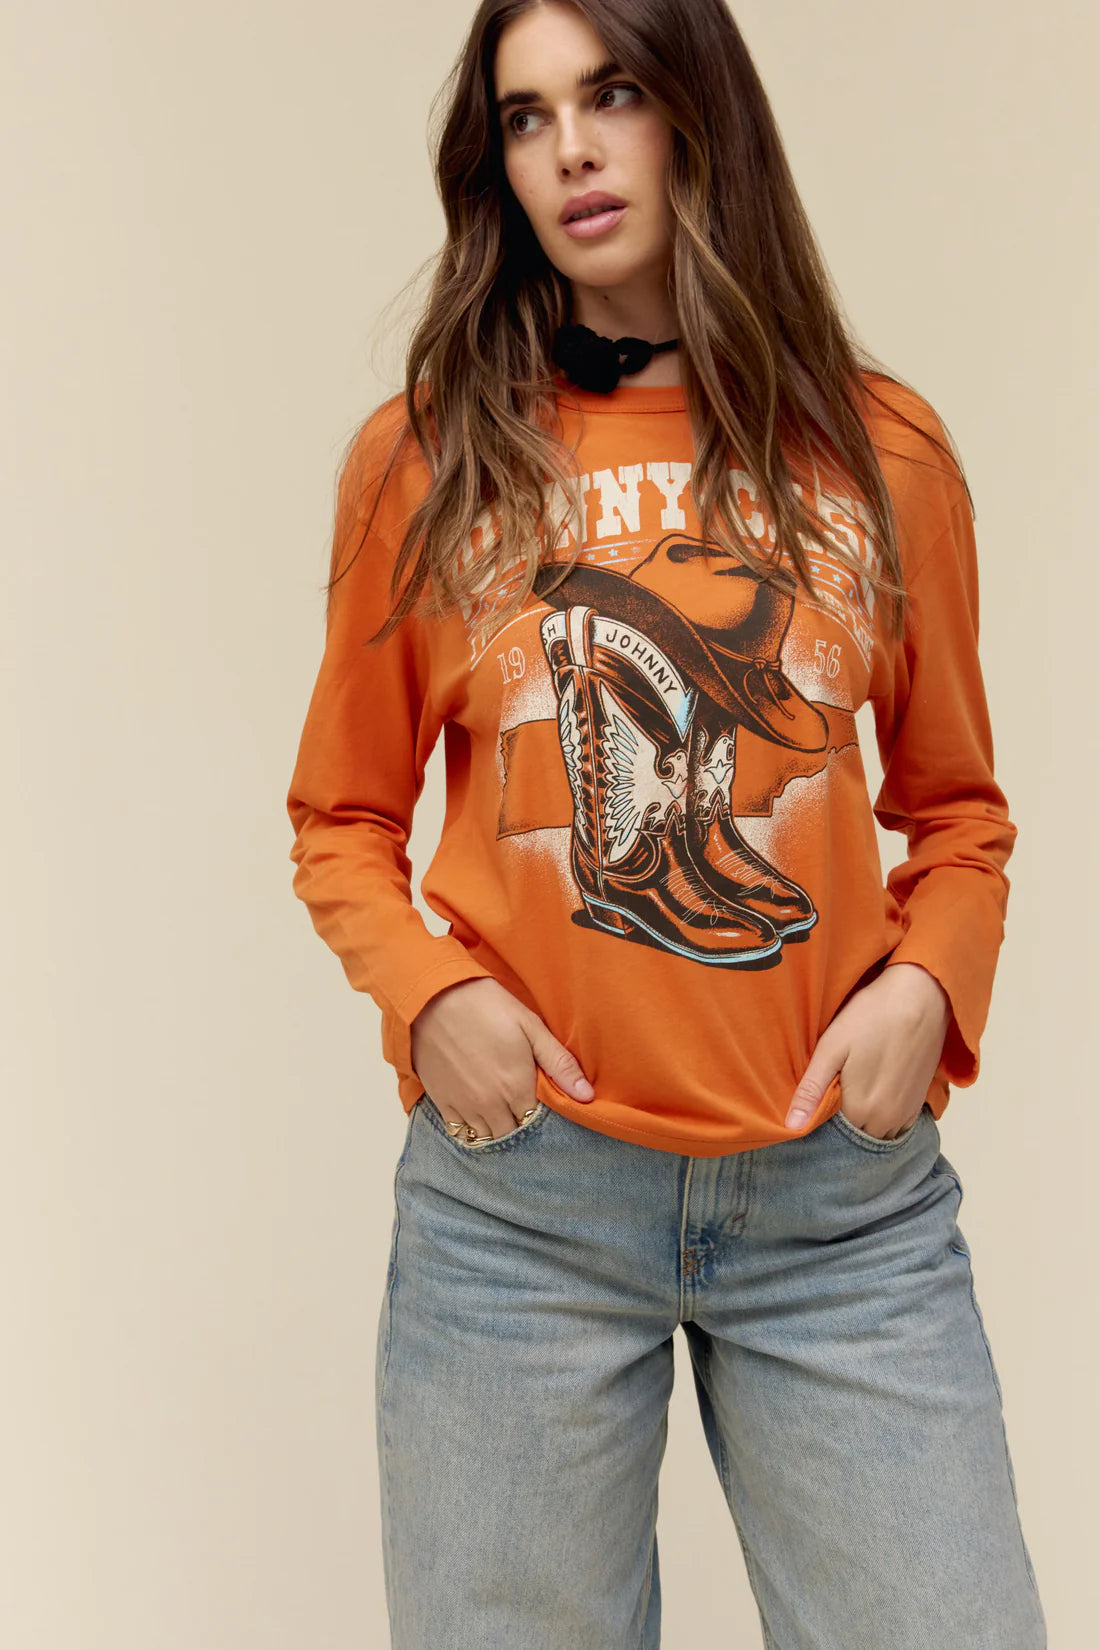 daydreamer johnny cash boots and hat long sleeve crewneck tee in tangerine-front